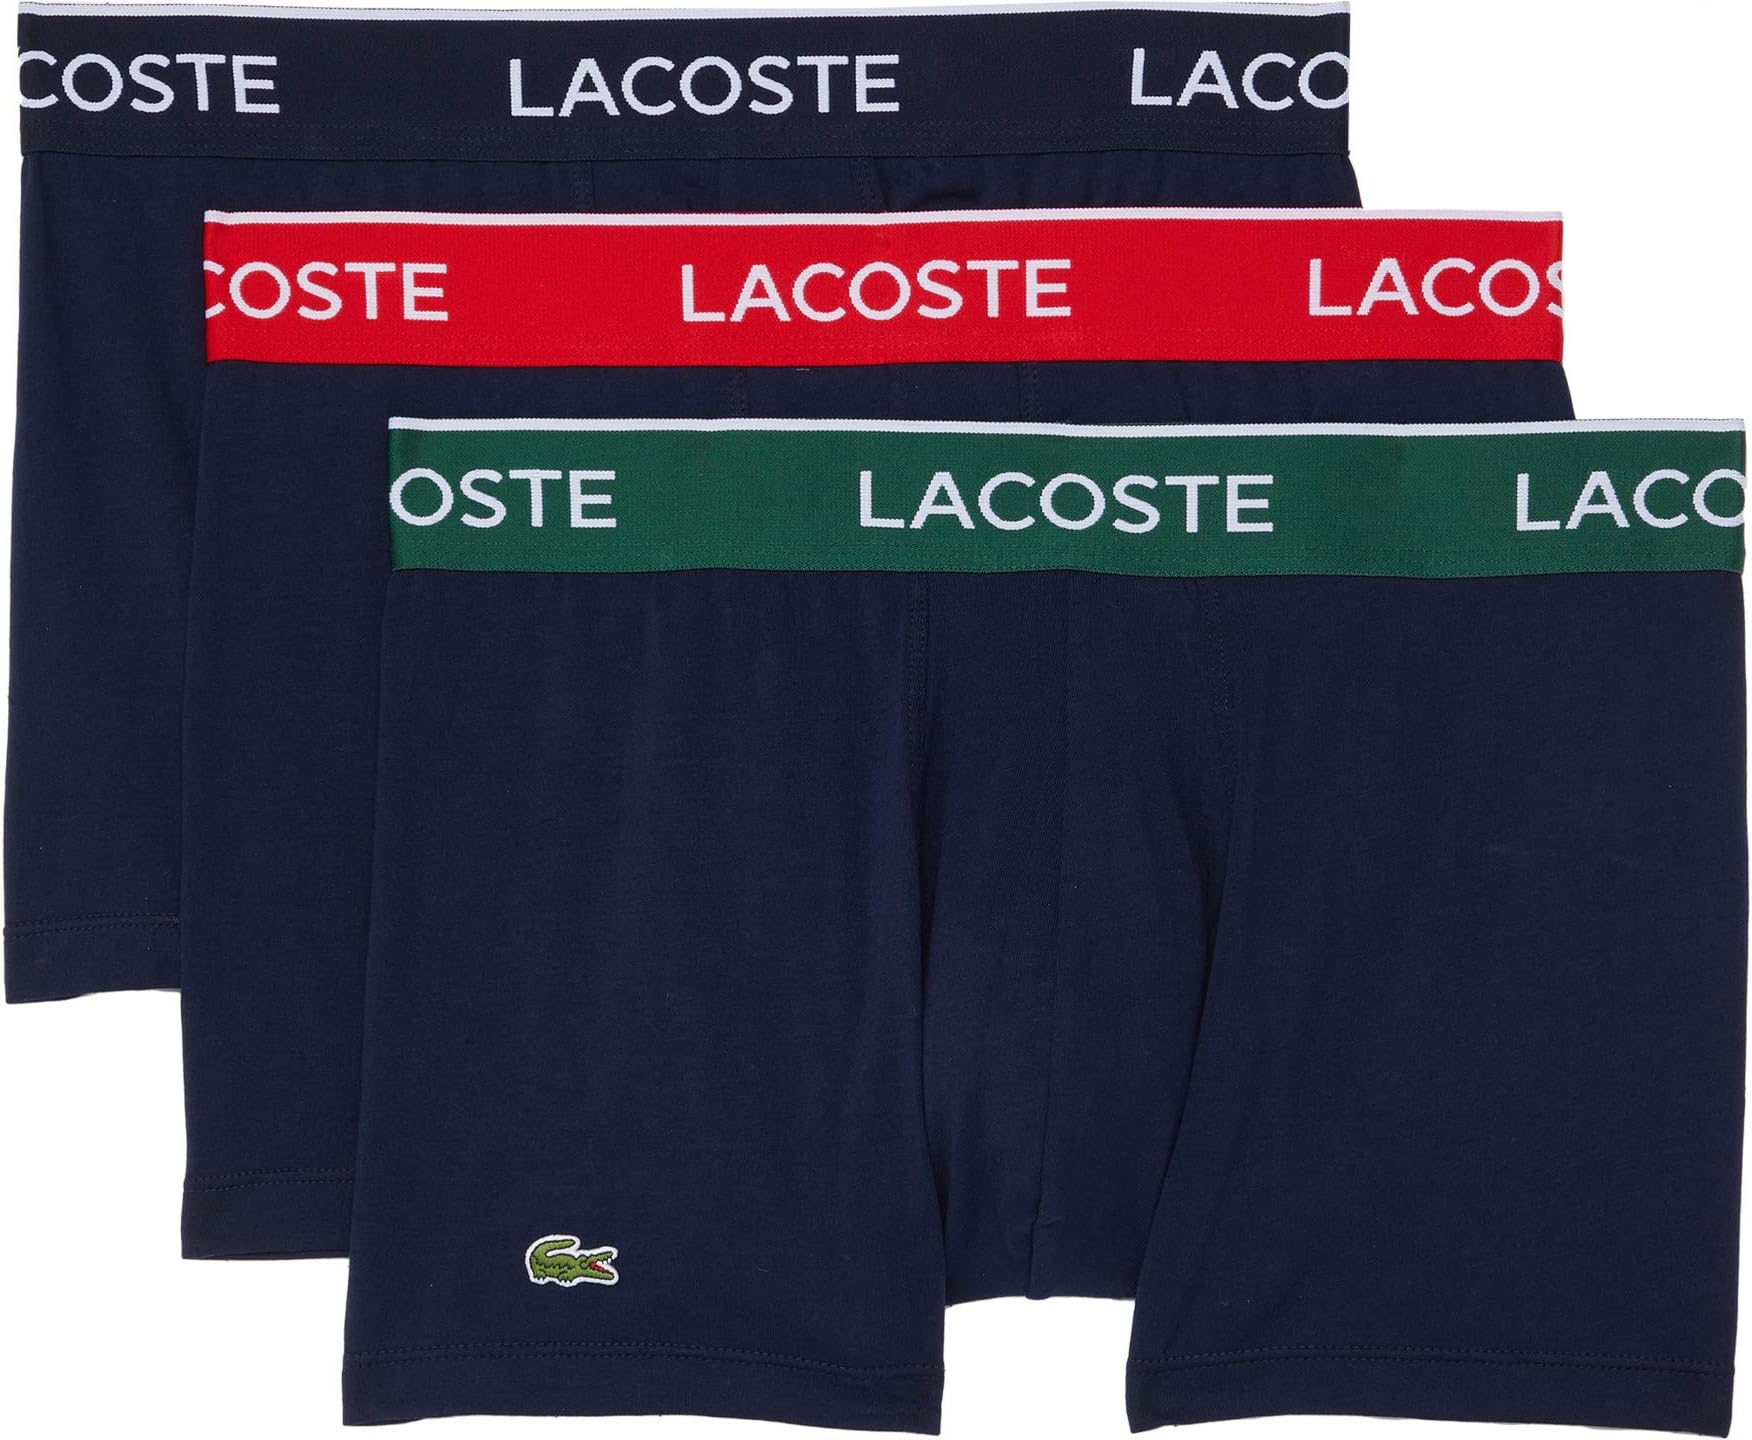 Трусы Trunks 3-Pack Casual Classic Colorful Waistband Lacoste, цвет Navy Blue/Green/Red/Navy Blue 15 6 navy blue laptop